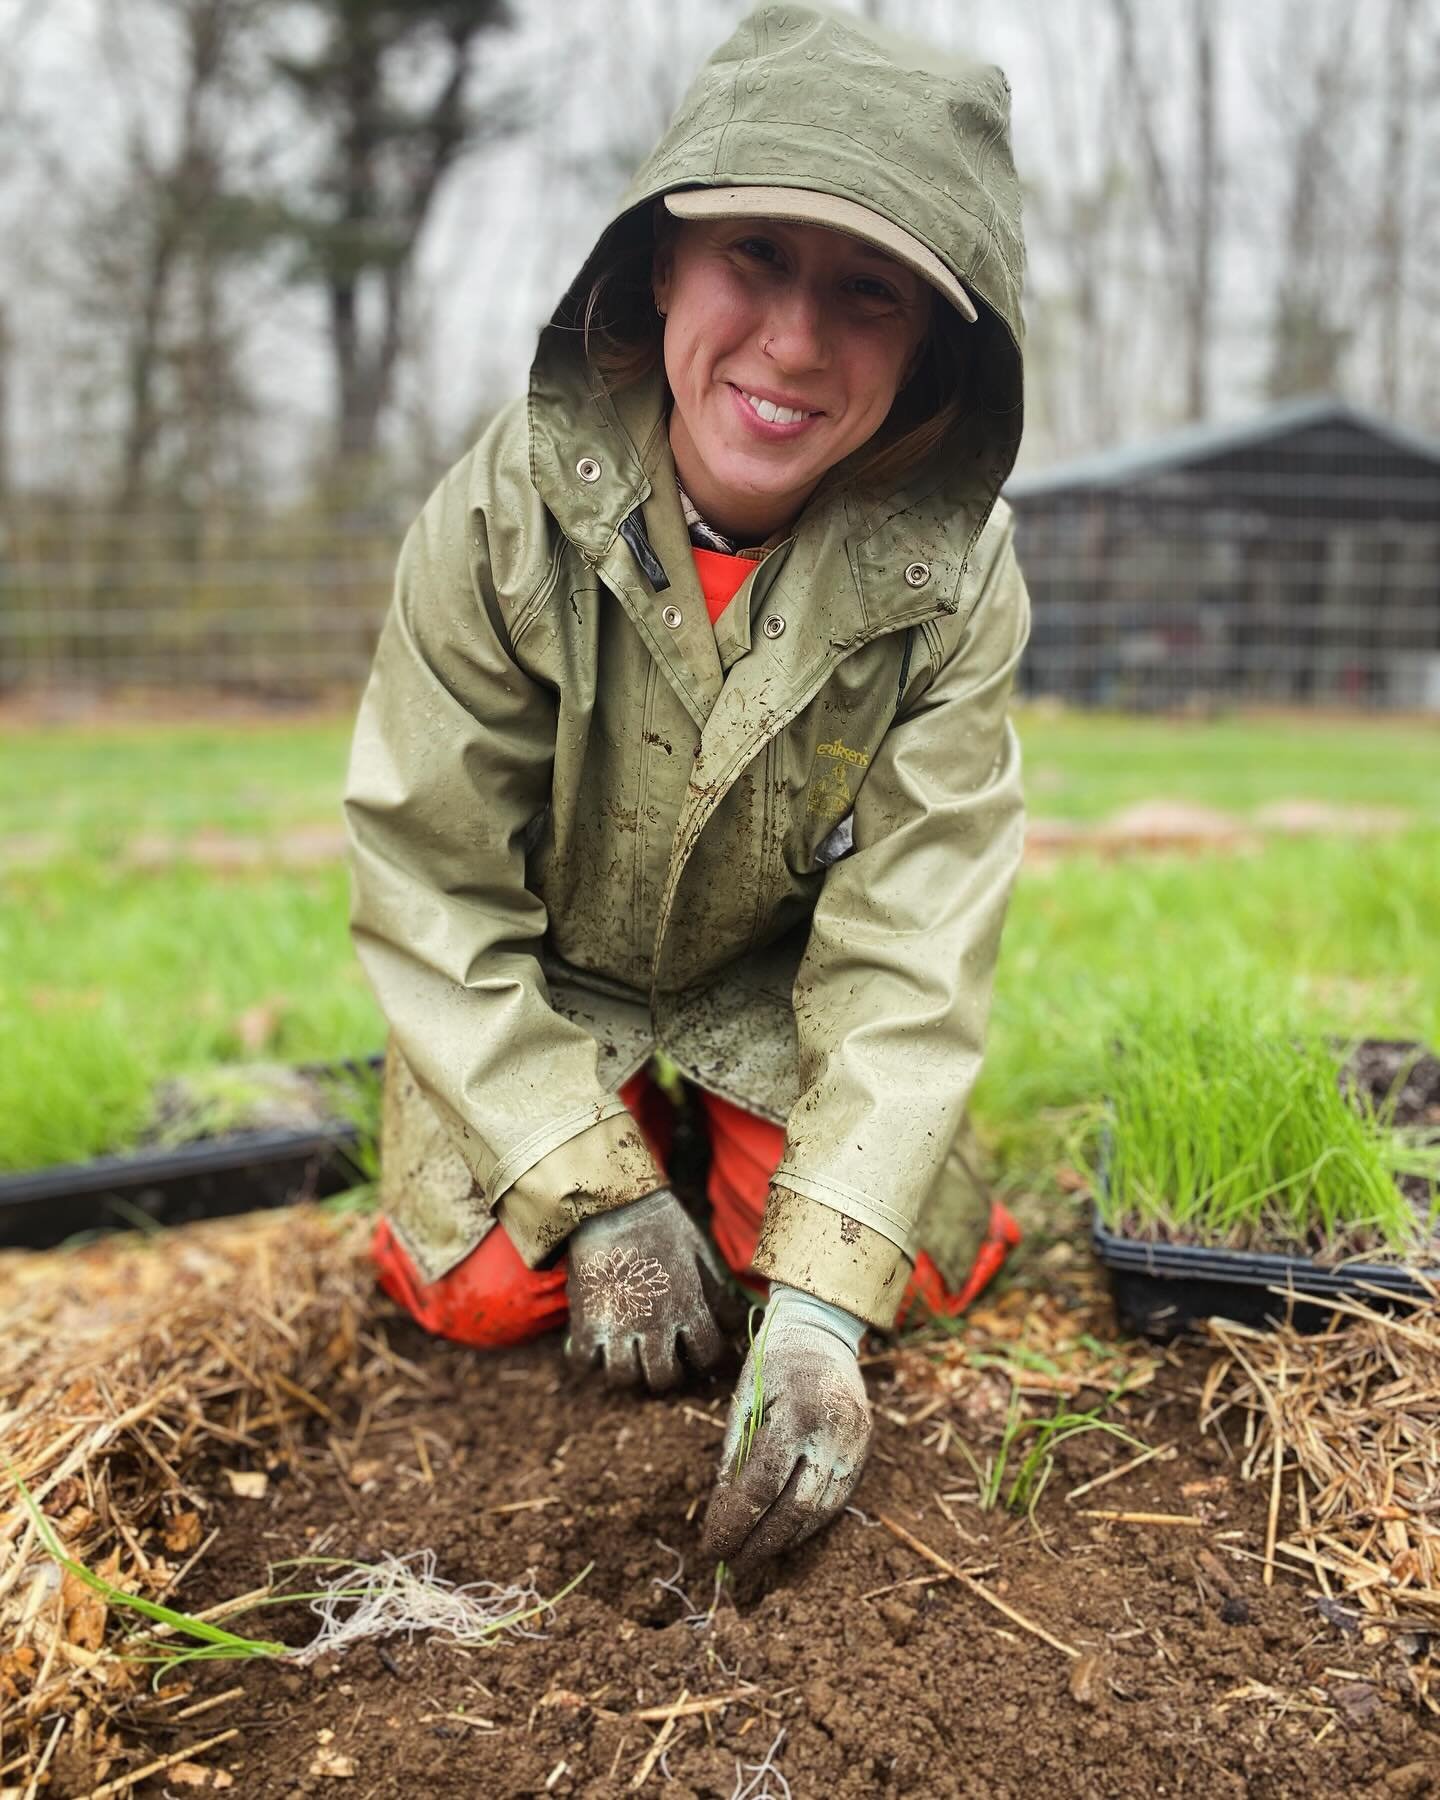 Bravo to our crew and volunteers for planting onions yesterday in the cold and rain (and wind). We continue today. @_hannaur @victoria_benditt @bonita.johnson.129 @mainelyindigothreads @tilmanpitcher @gracehoward9 Marry, Jules, Heidi and Kate @wwoofu